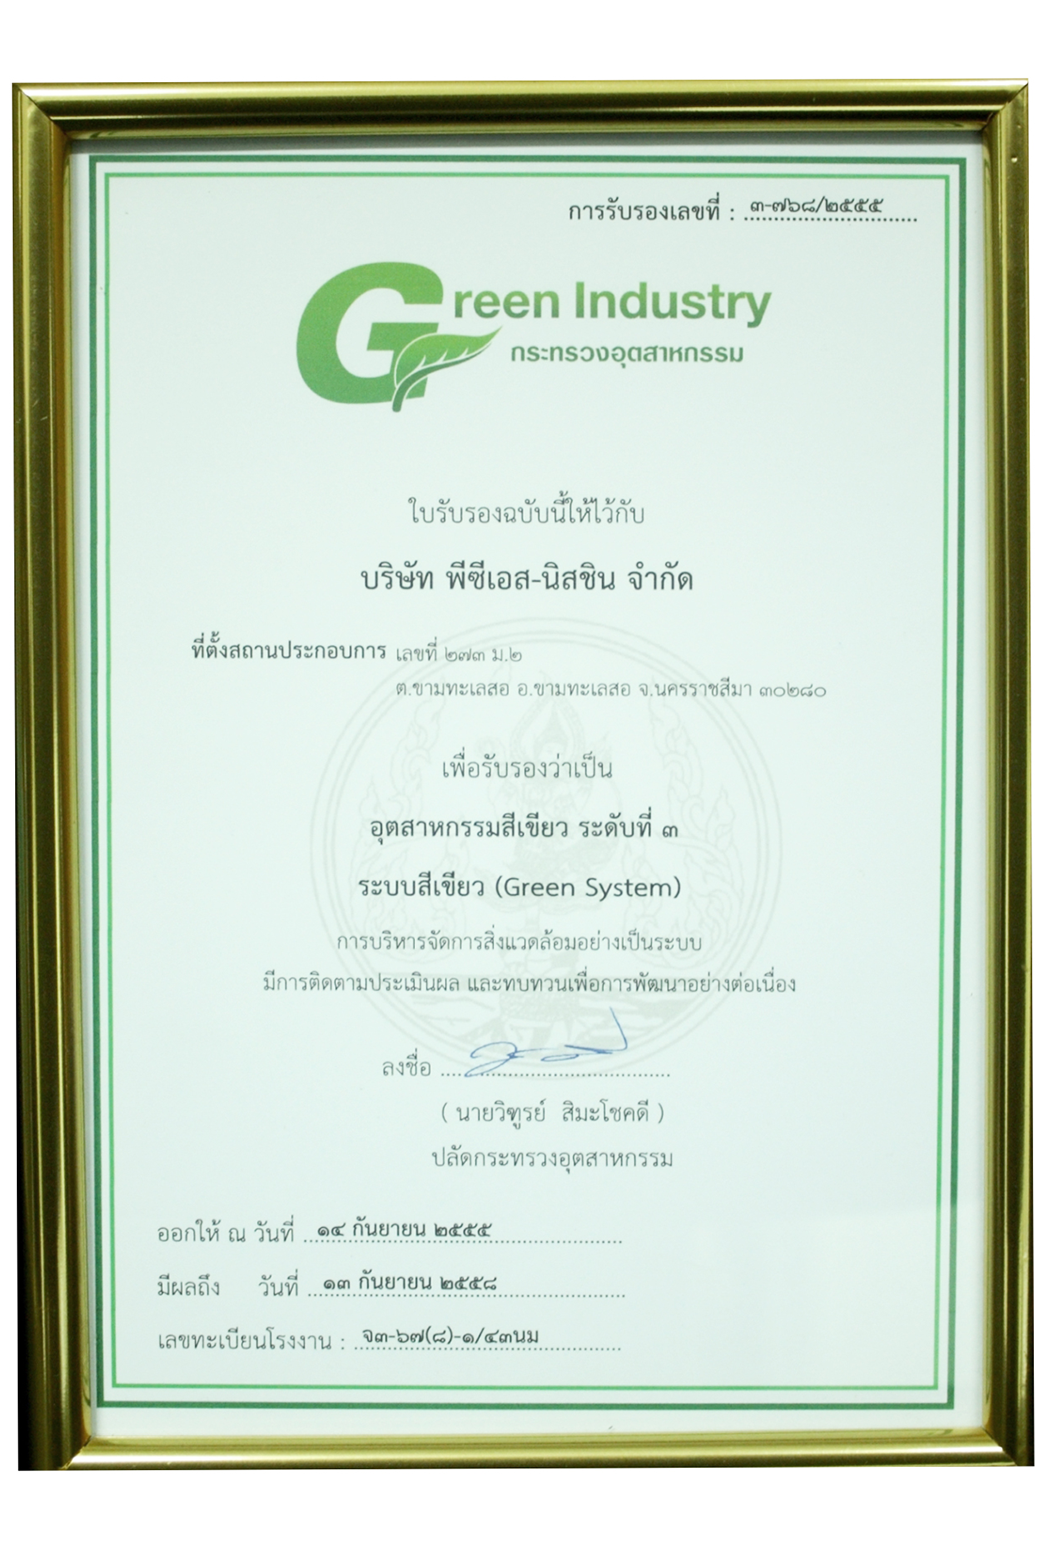 Green-Industry-of-Ministry-of-Industry-2012